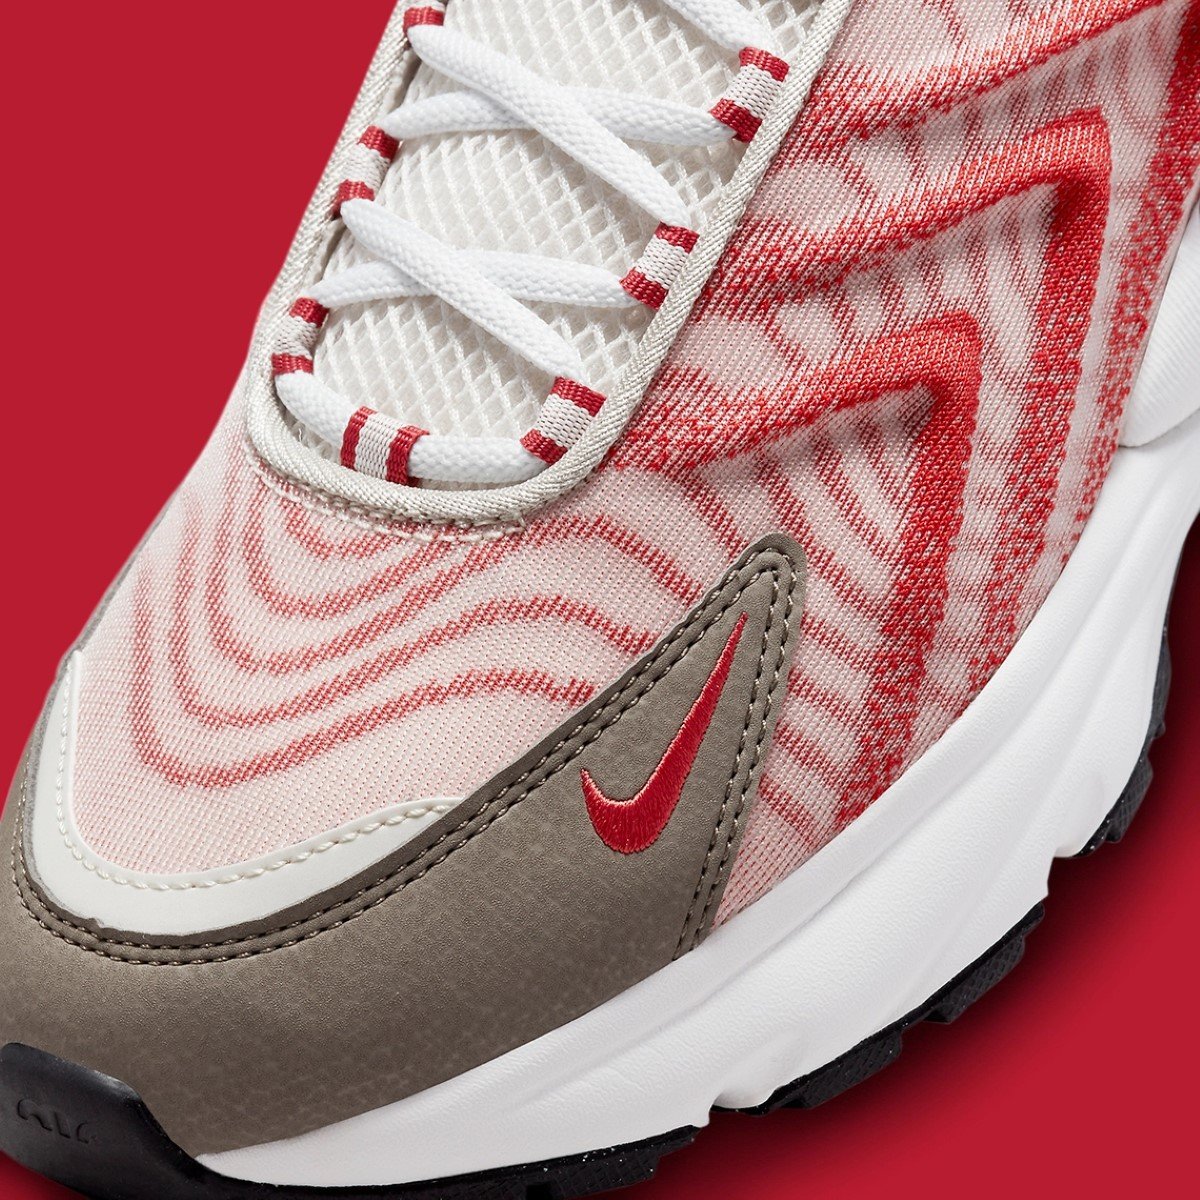 Nike Air Max TW "Red Clay"